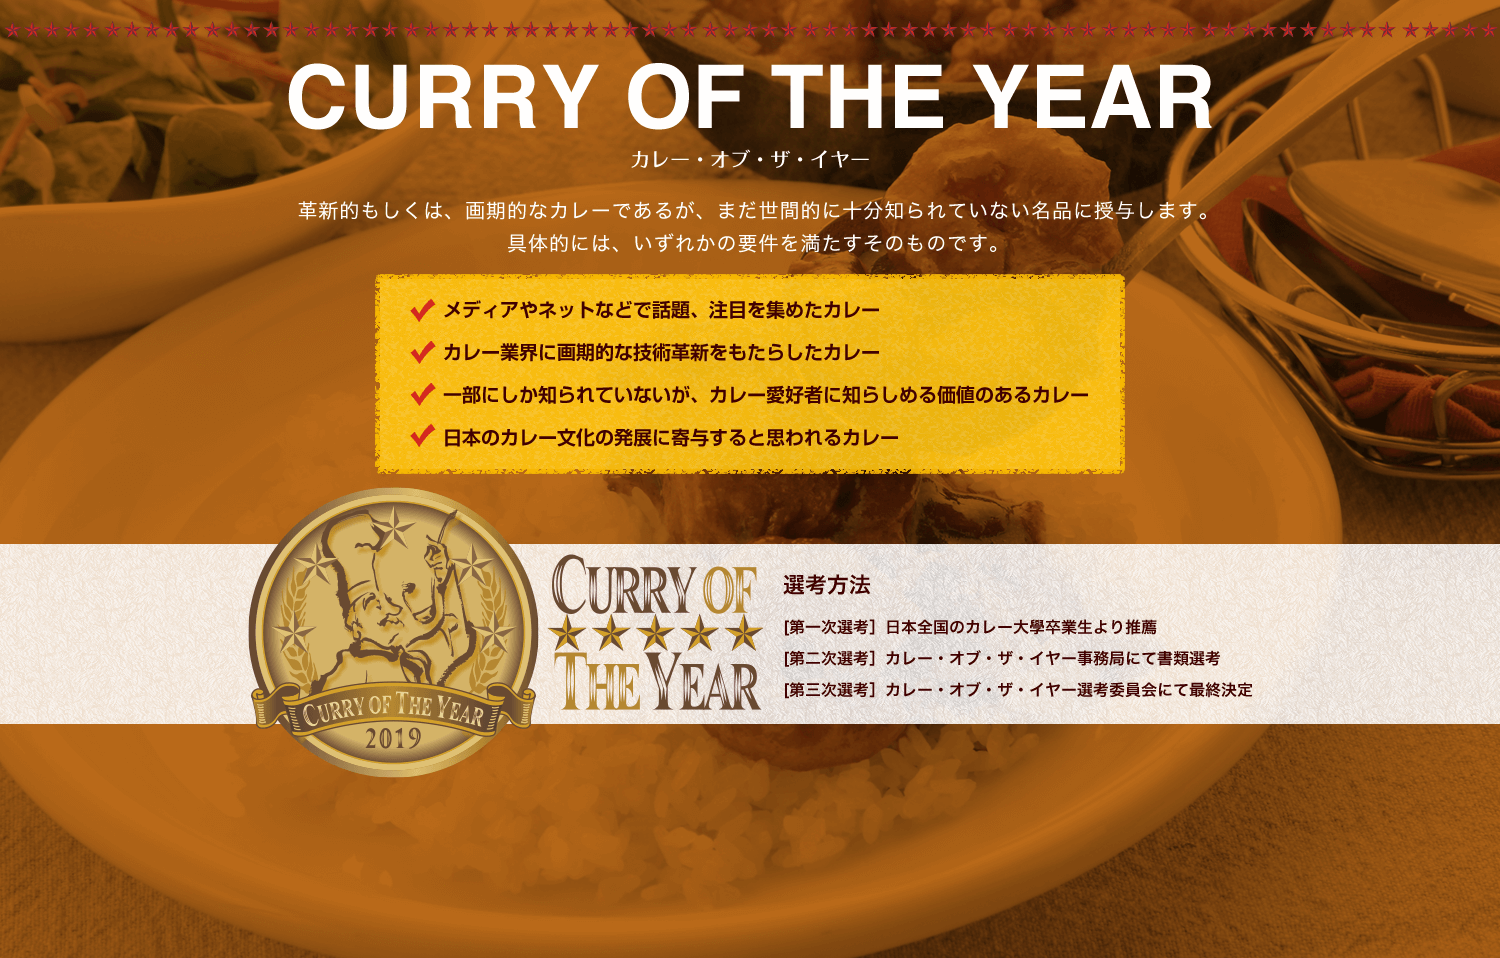 CURRY OF THE YEAR カレー・オブ・ザ・イヤー